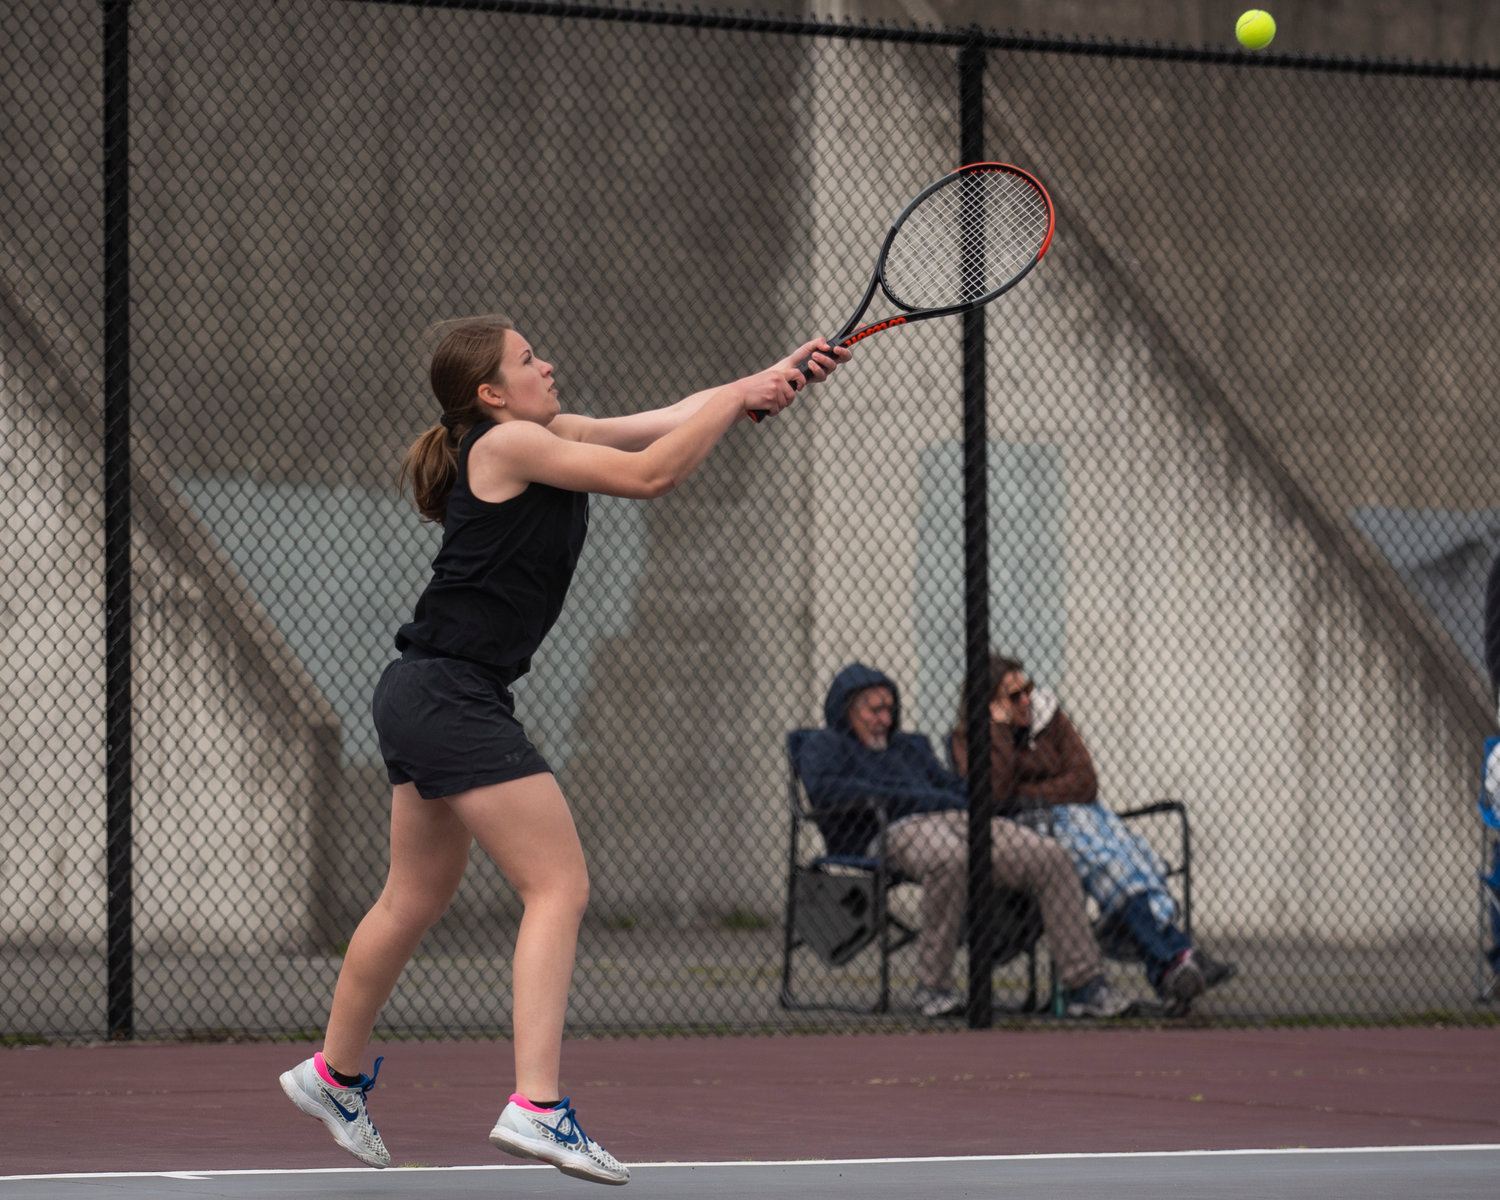 Evie Rooklidge, first singles player for Centralia, hits a backhand against W.F. West in Chehalis on Friday.